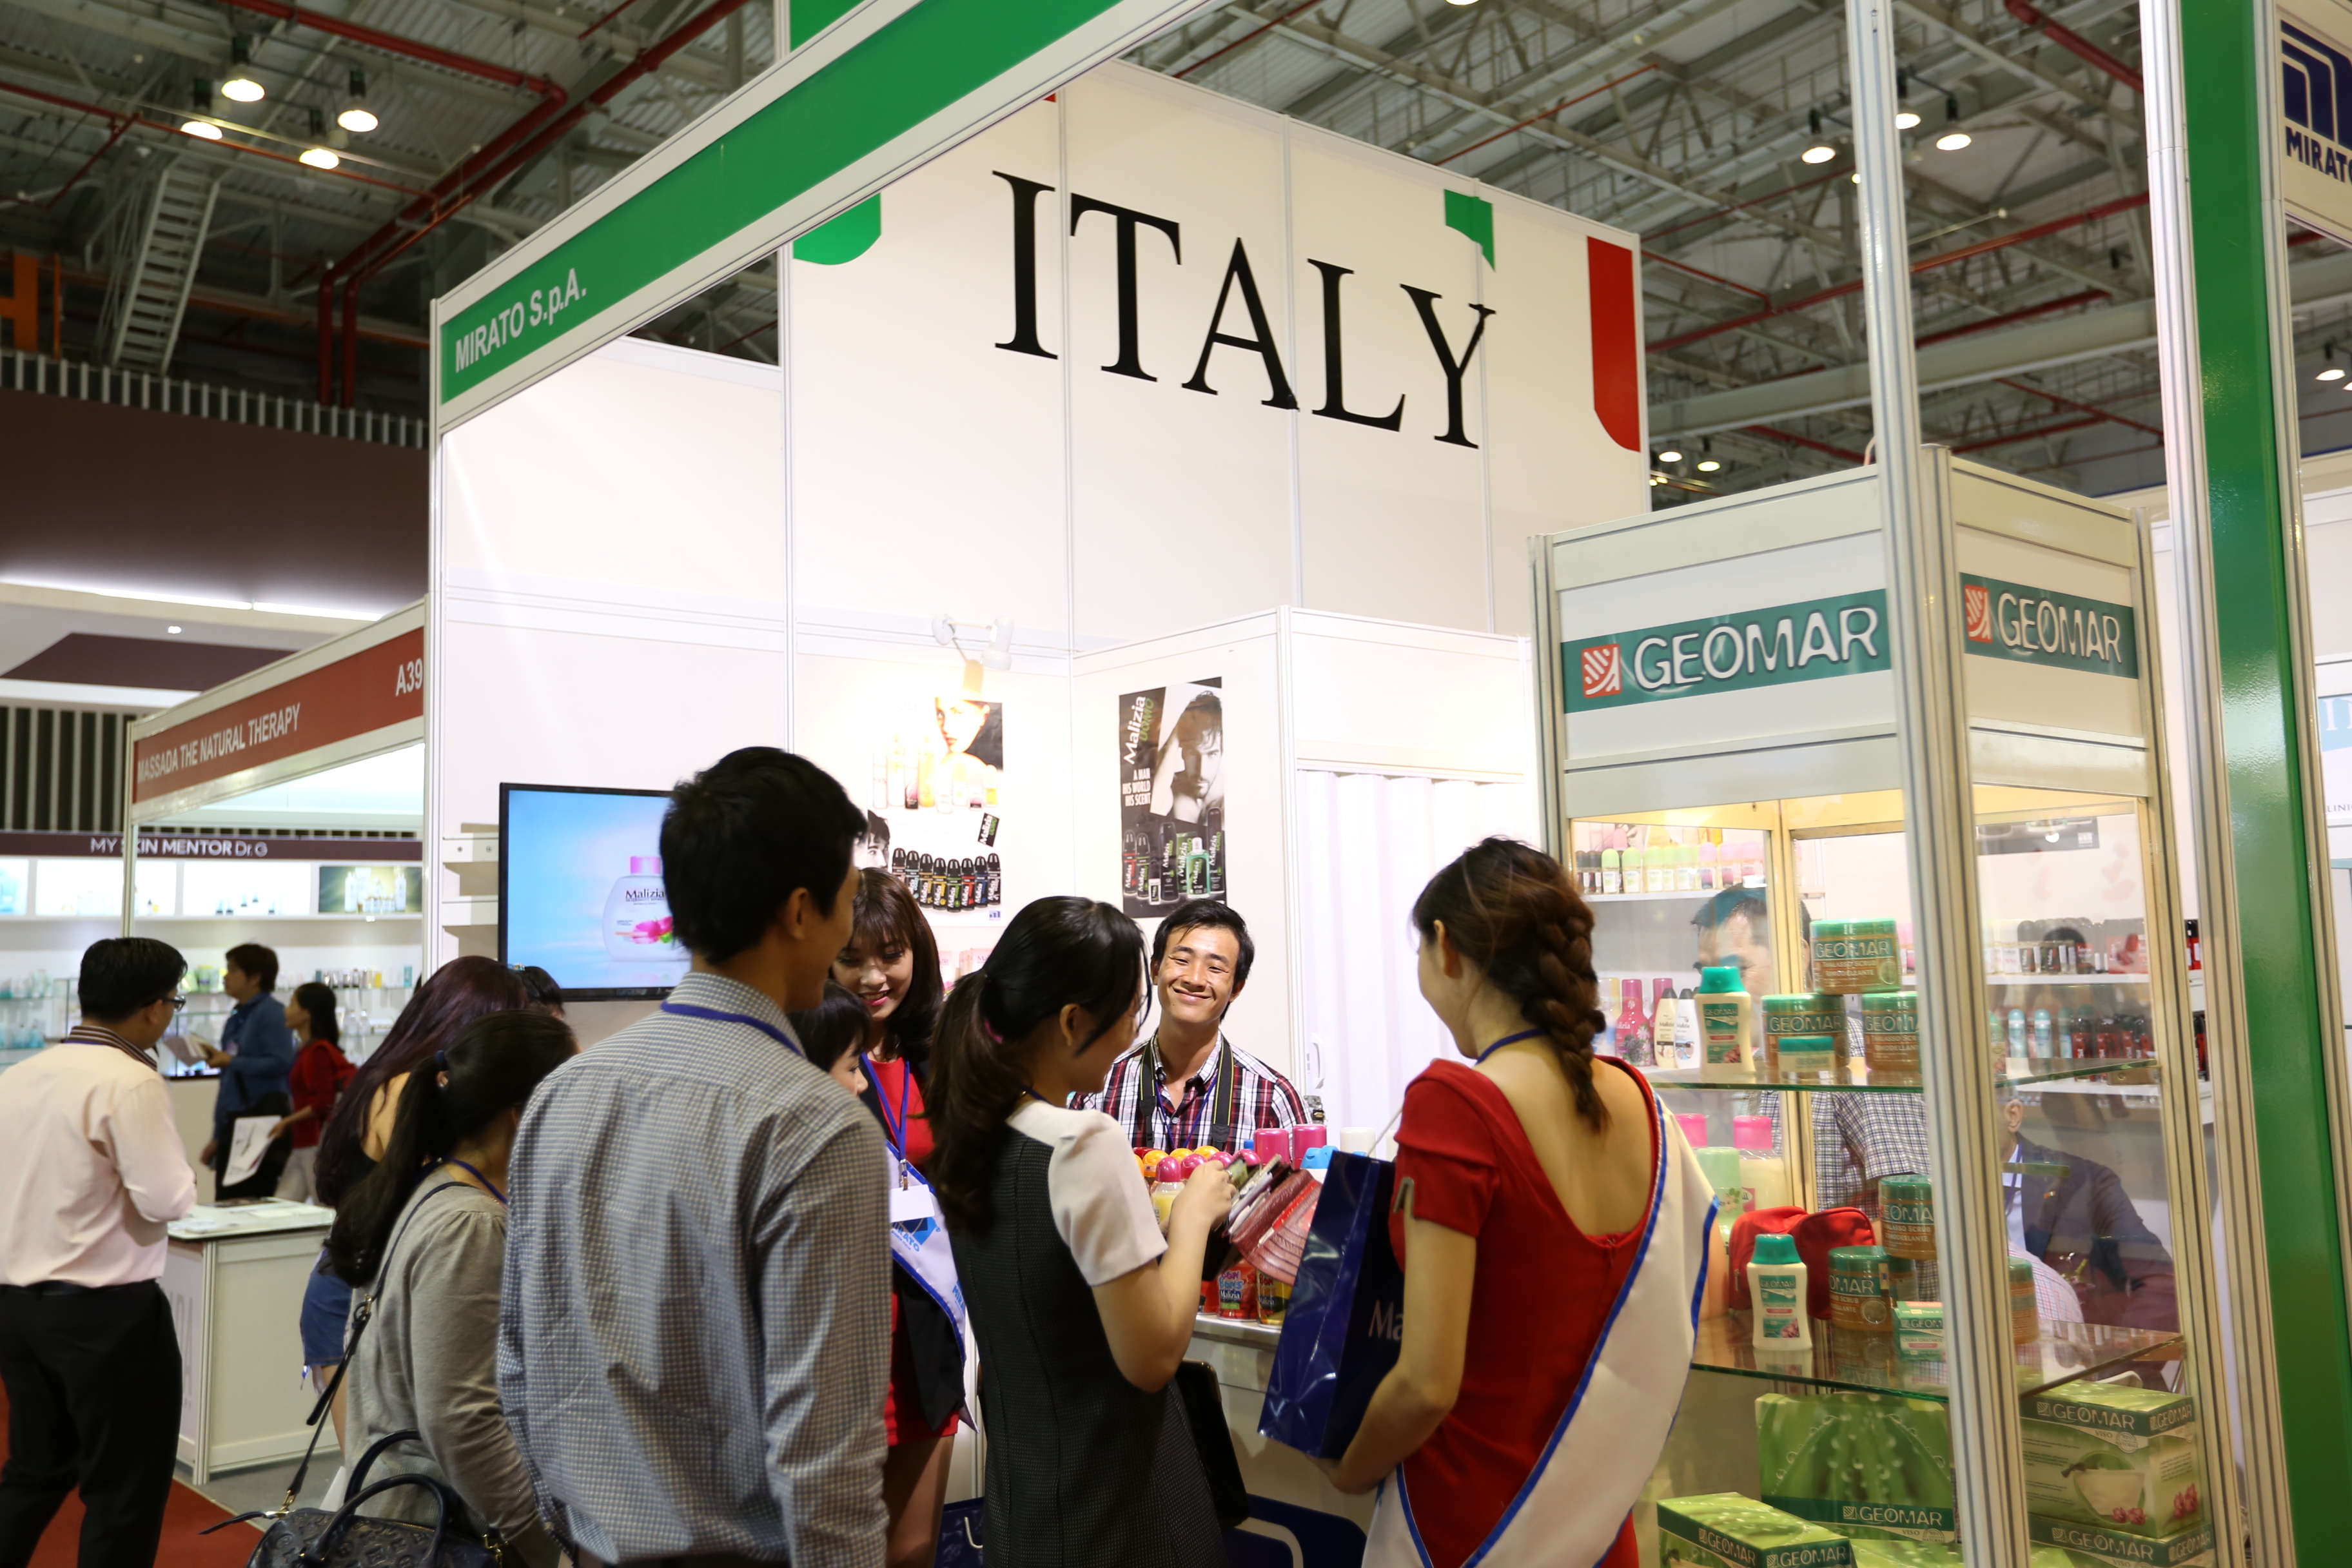 Italy booth dont crop out the ITALY text